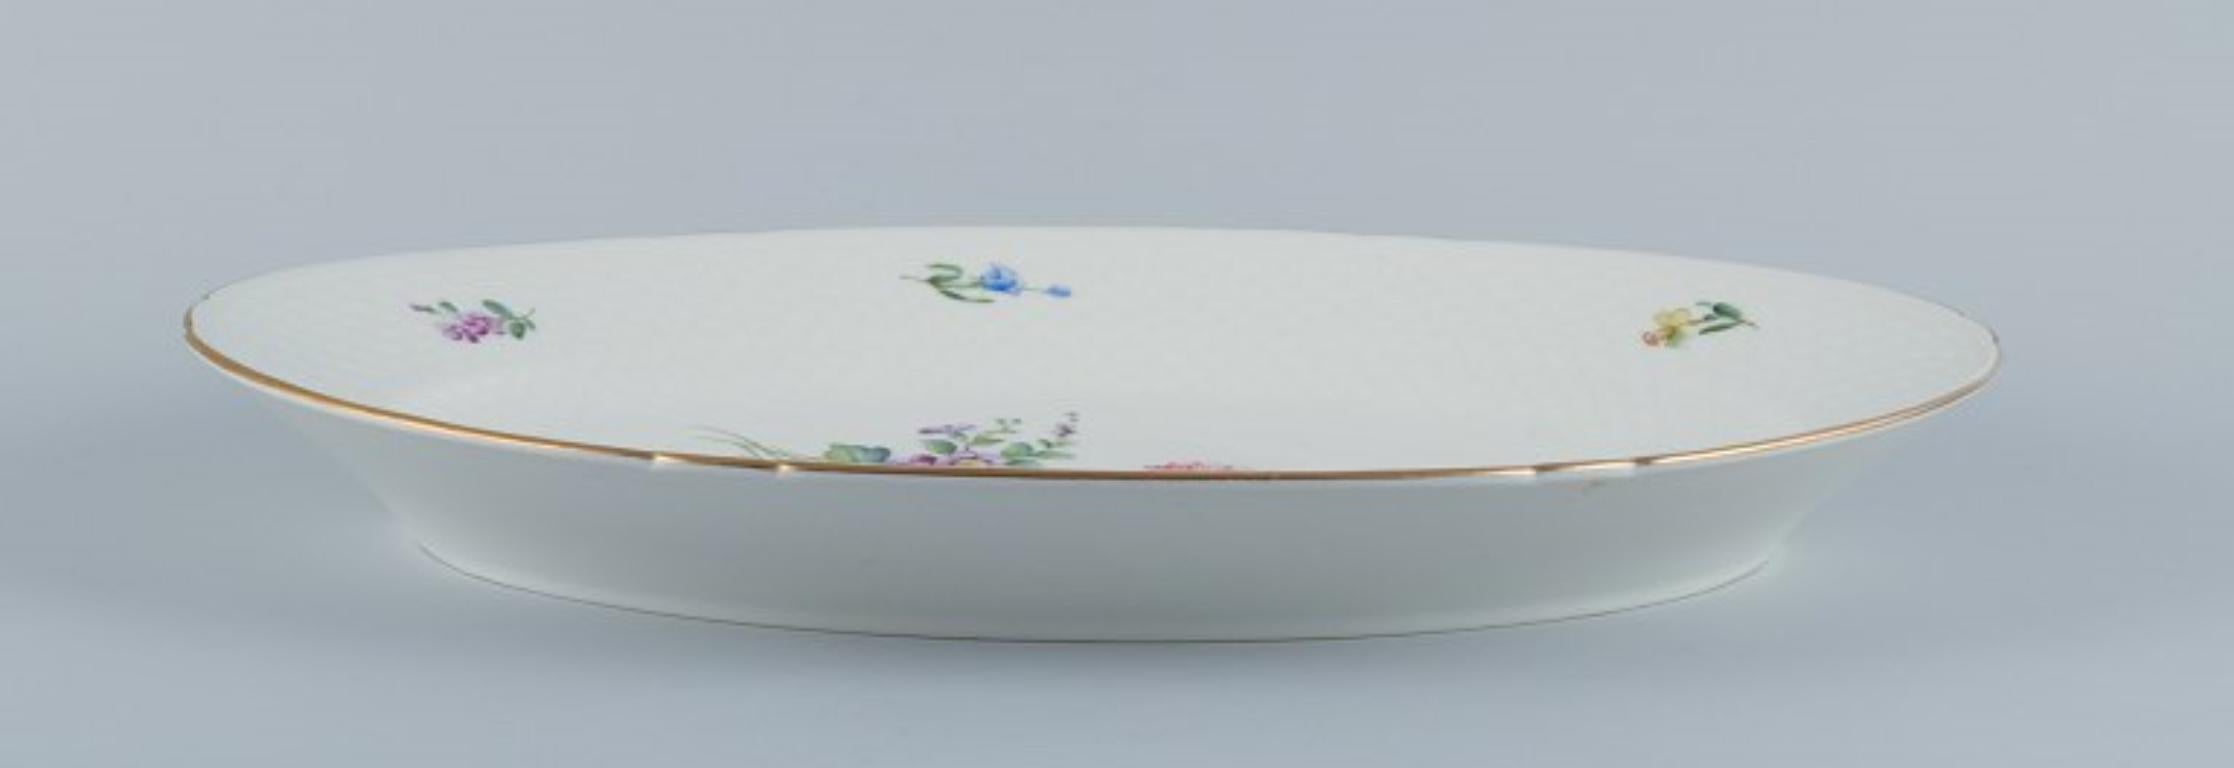 Bing & Grøndahl, Saxon Flower, large oval serving platter. Hand-painted.
Approx. 1920/30s.
Model number 15.
Marked.
First factory quality.
In perfect condition.
Dimensions: L 41.0 cm. x W 28.7 cm. x Depth 4.5 cm.